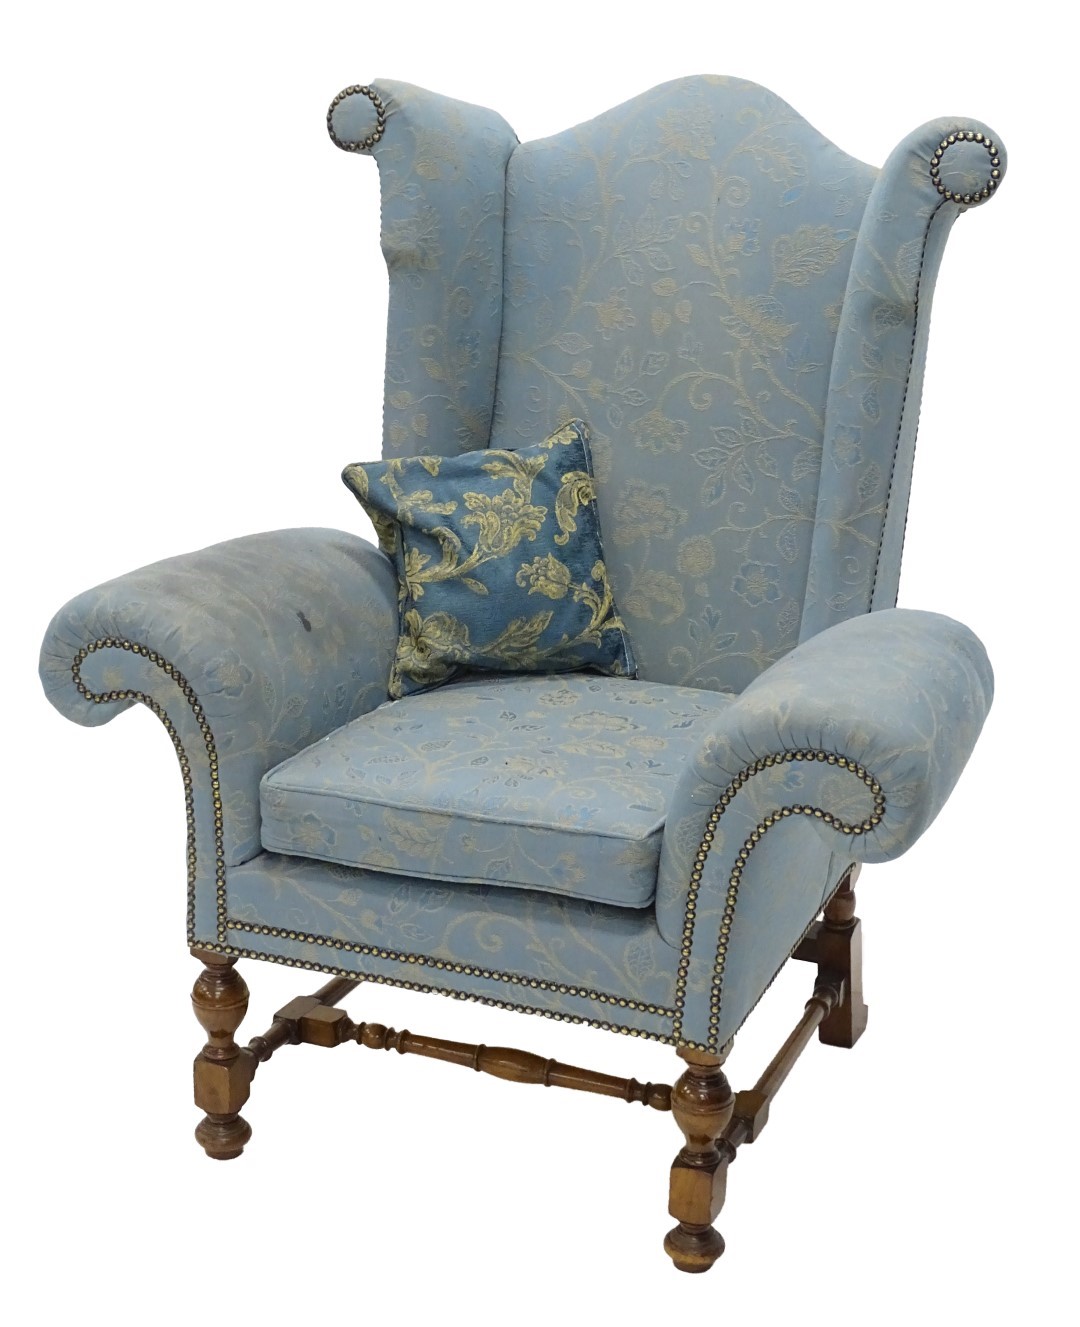 An unusual walnut wingback armchair, upholstered in pale blue and gold patterned fabric with studded